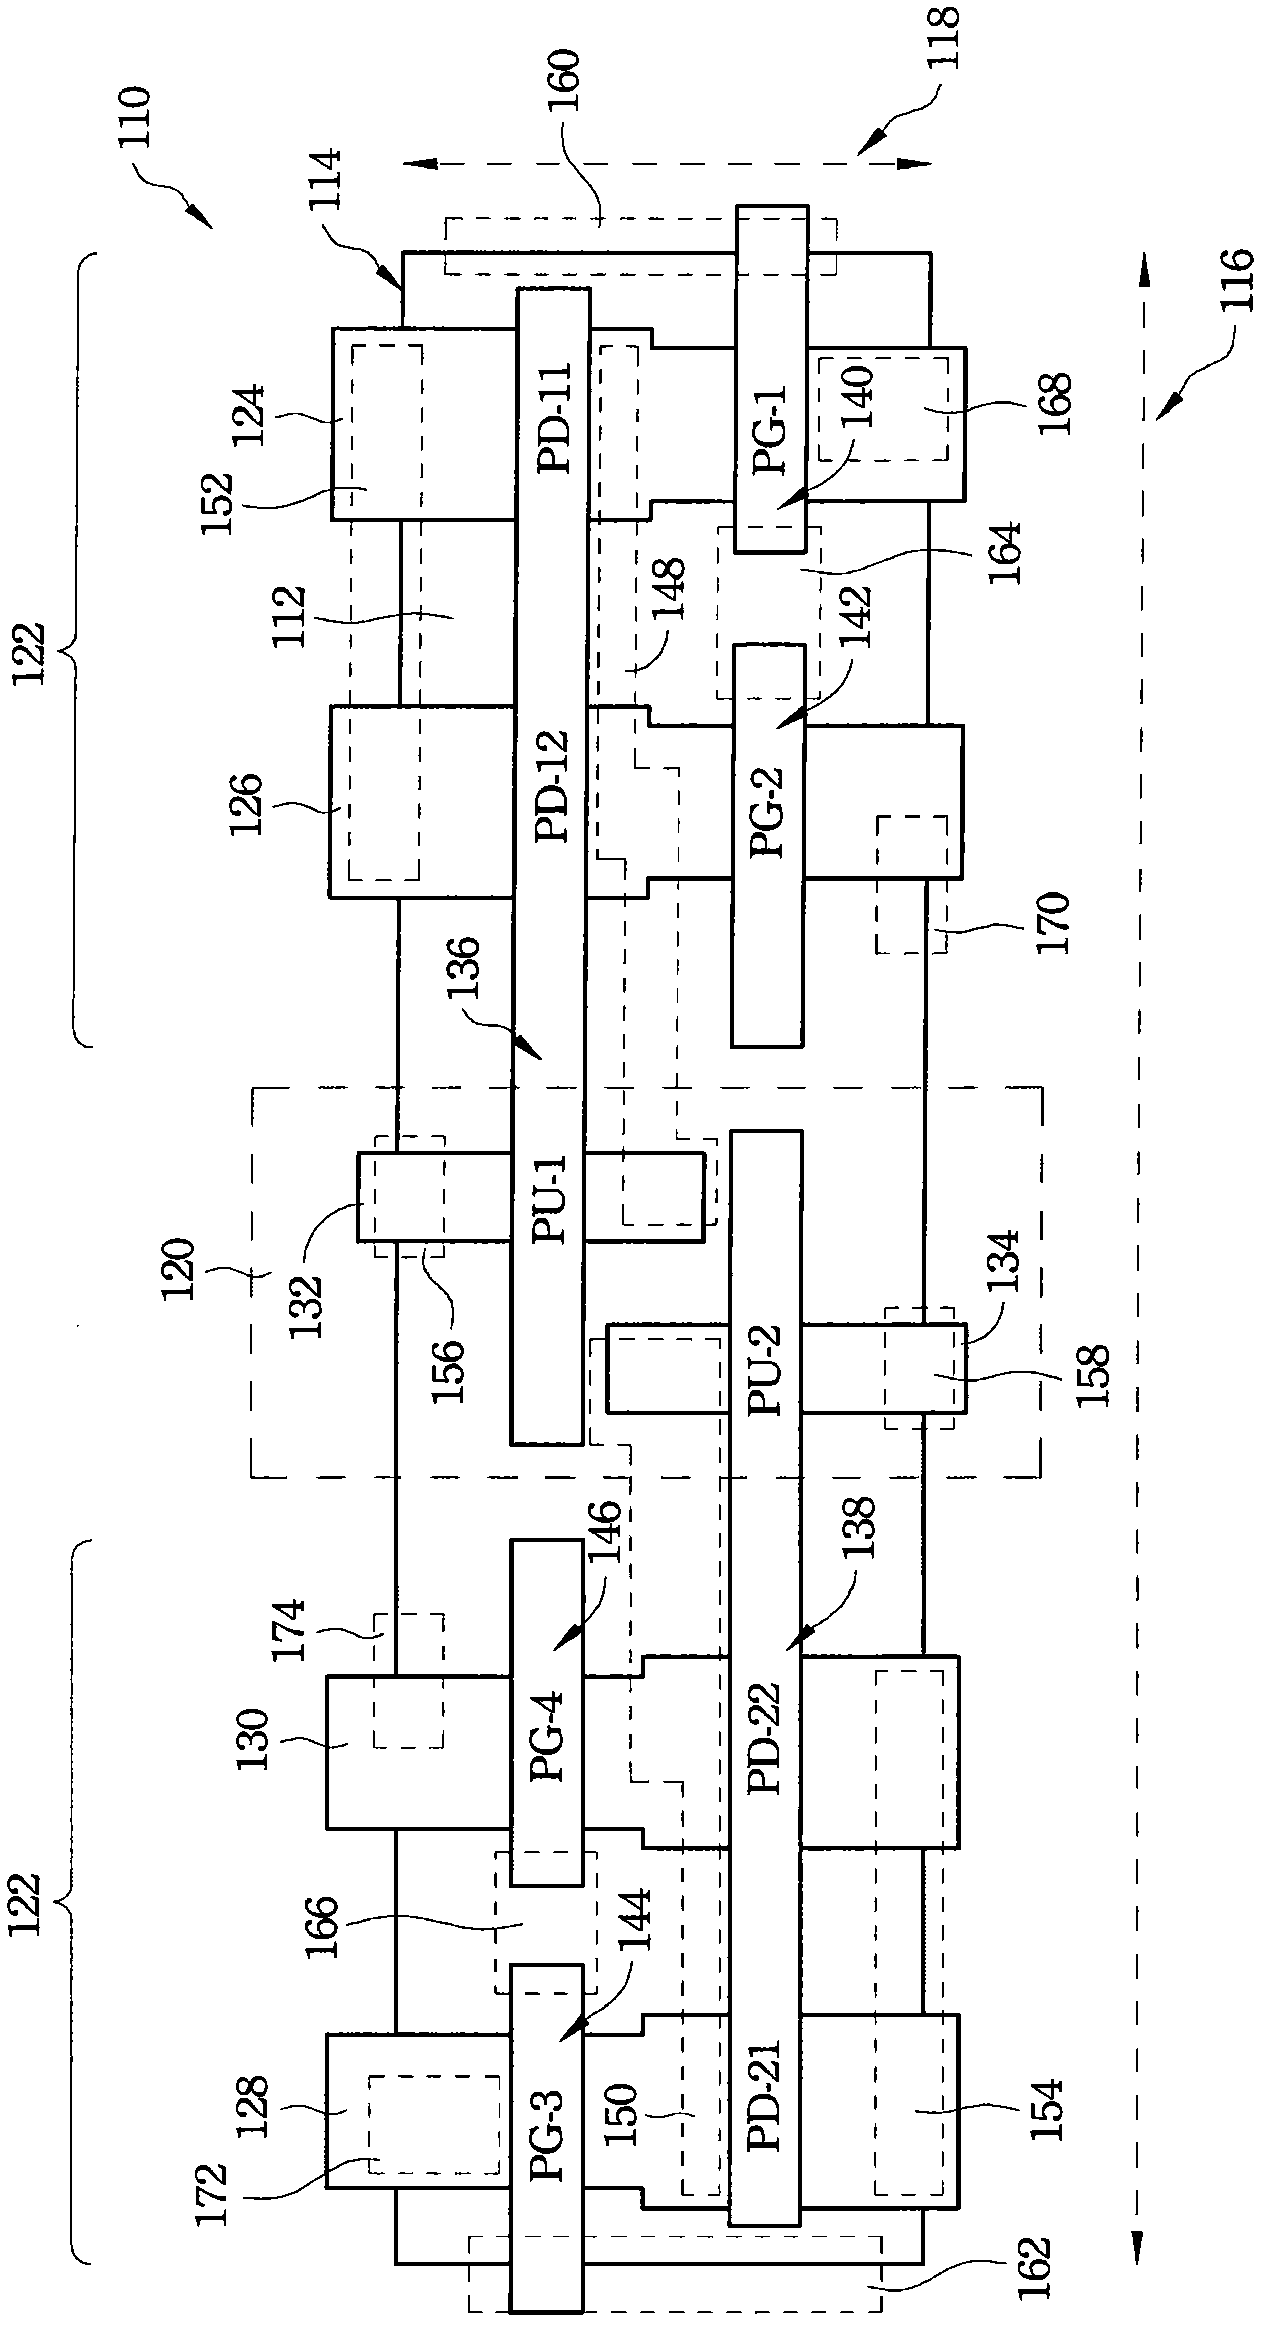 Fully balanced dual-port memory cell